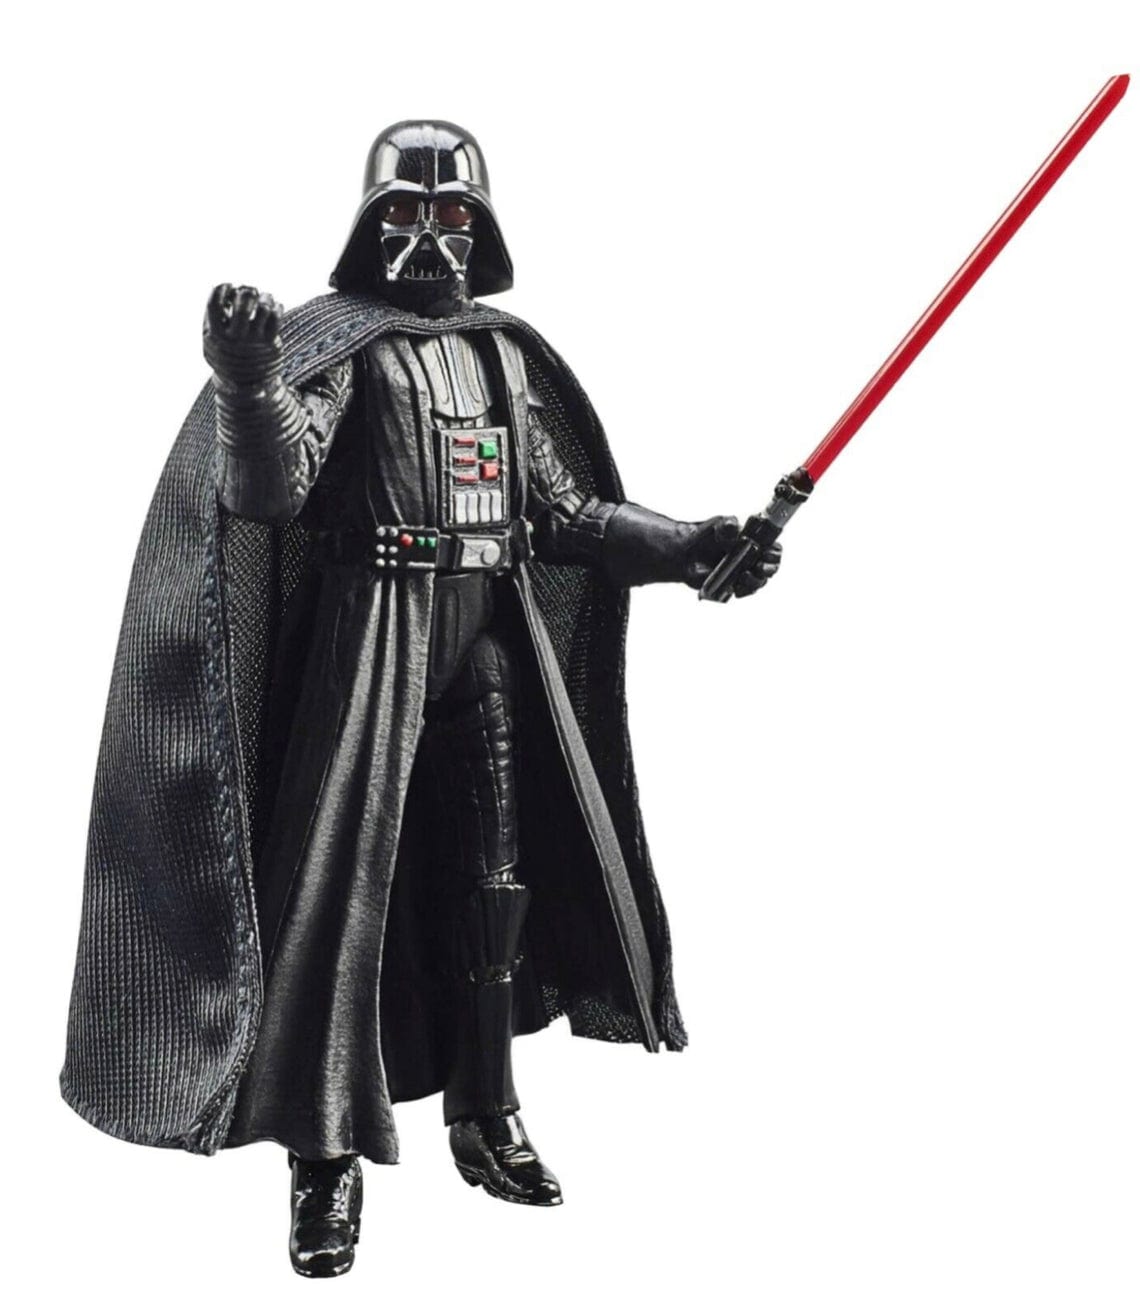 Star Wars The Vintage Collection: Rogue One Darth Vader 3.75-Inch Action Figure